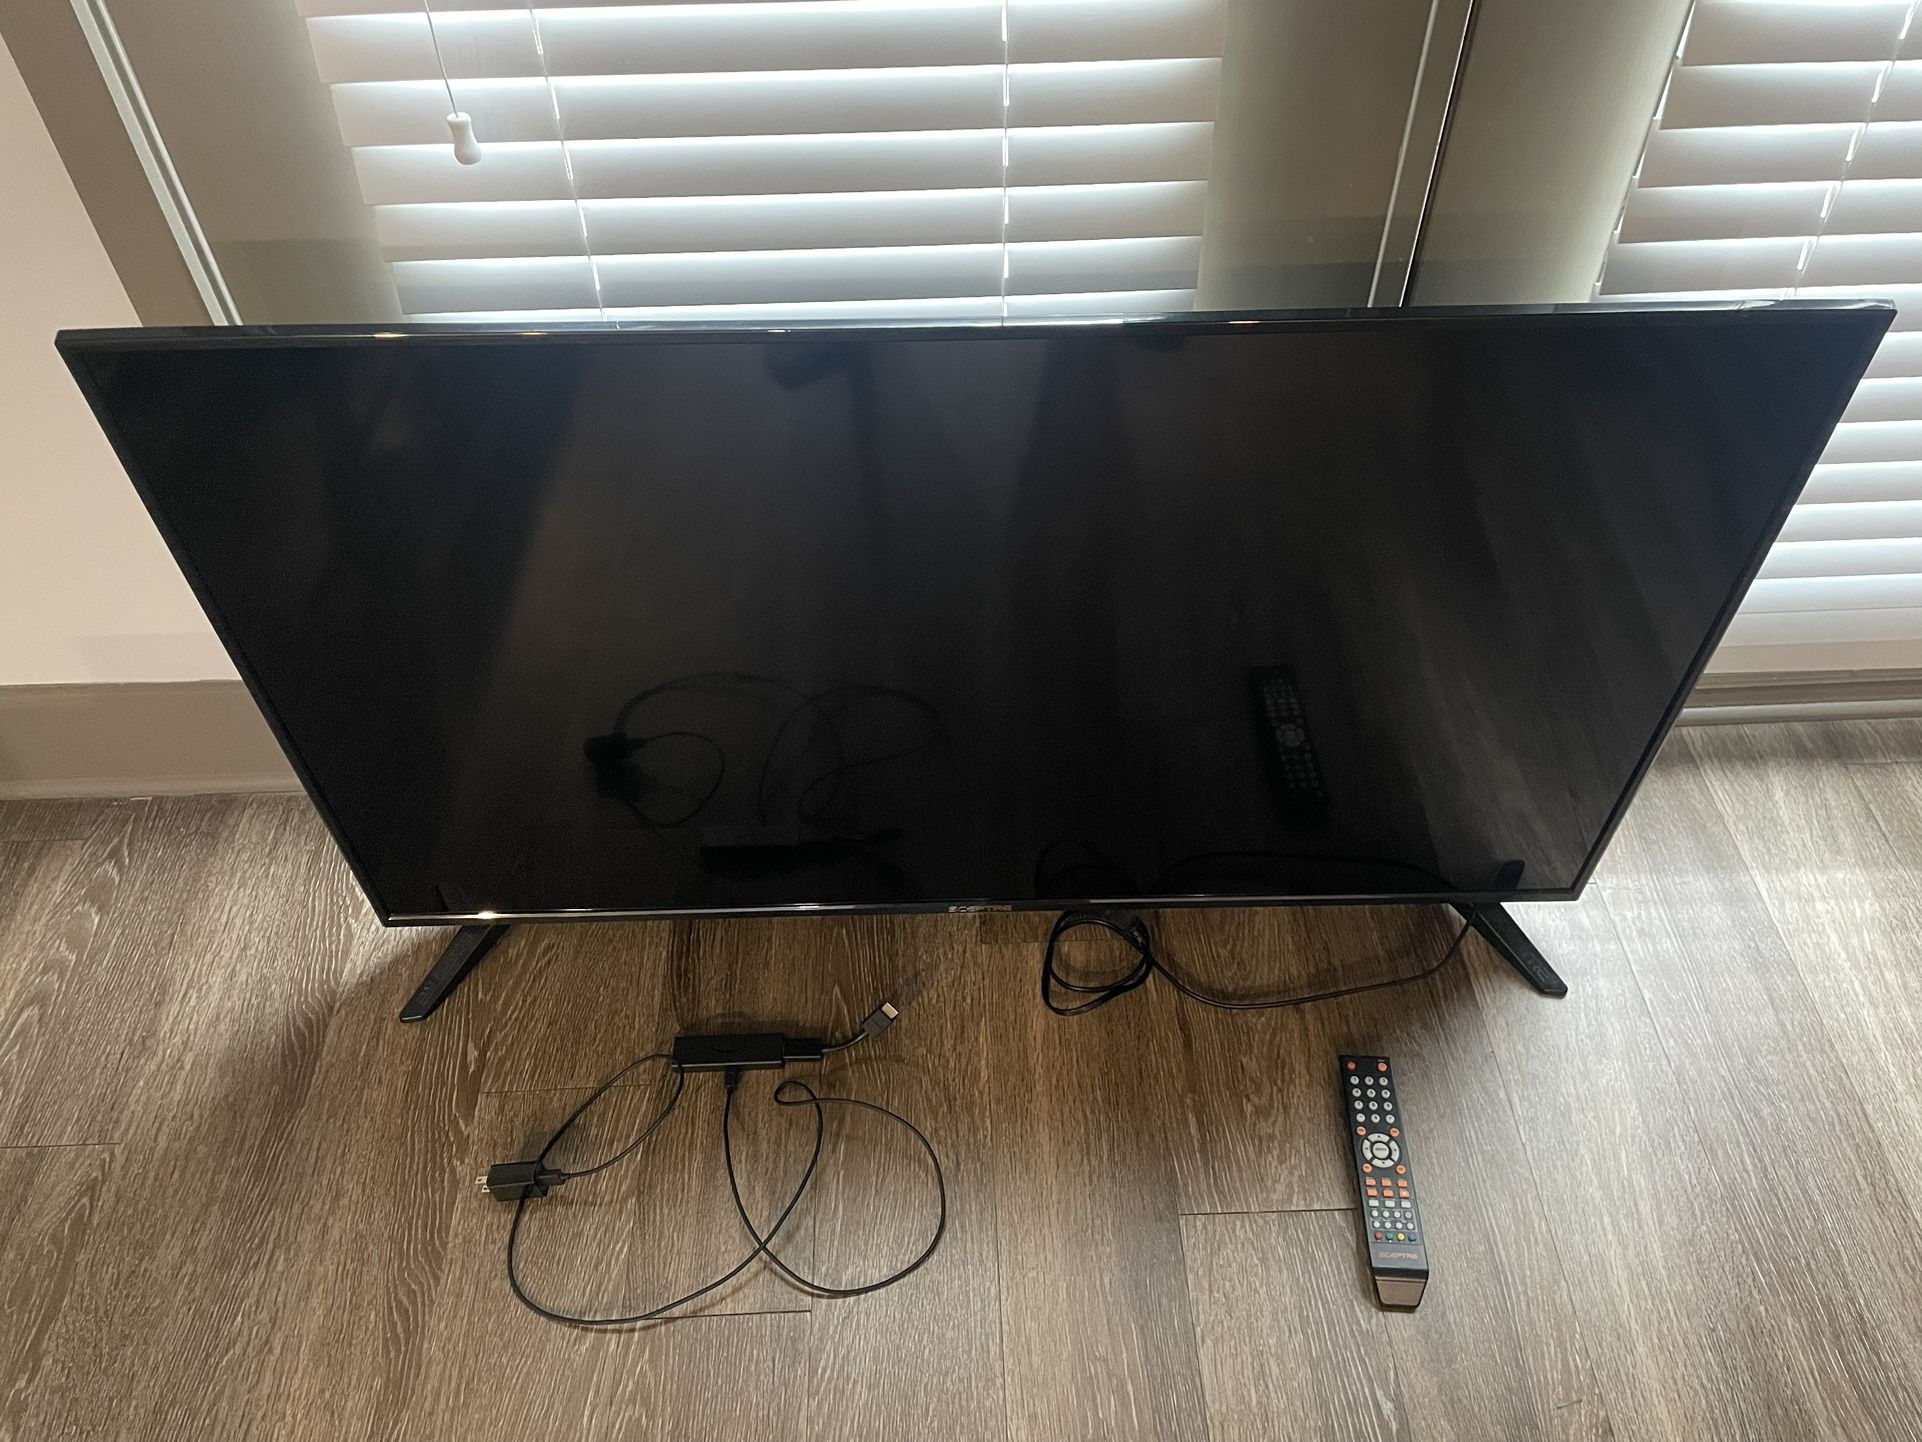 50” Sceptre 1080p TV with Remote and Amazon Fire Stick + Remote (all batteries included)